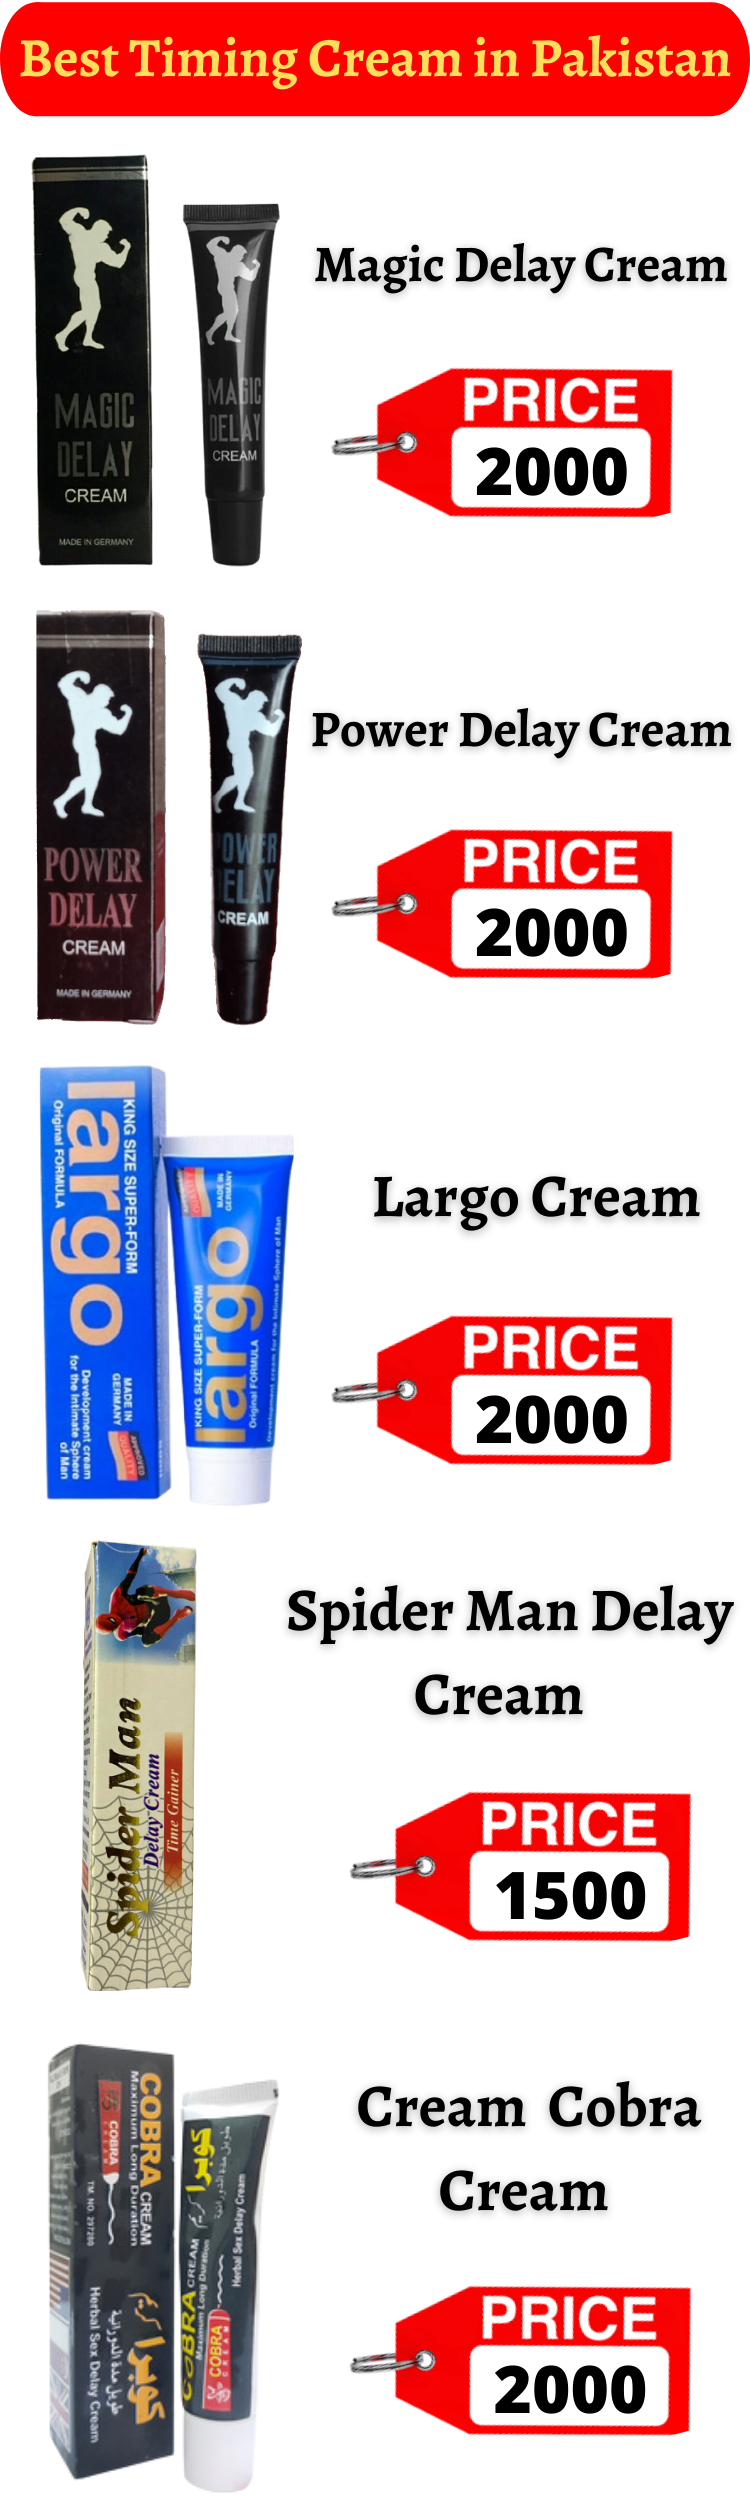 Best Timing Cream in Pakistan For 40 Minutes Long Sex Timing